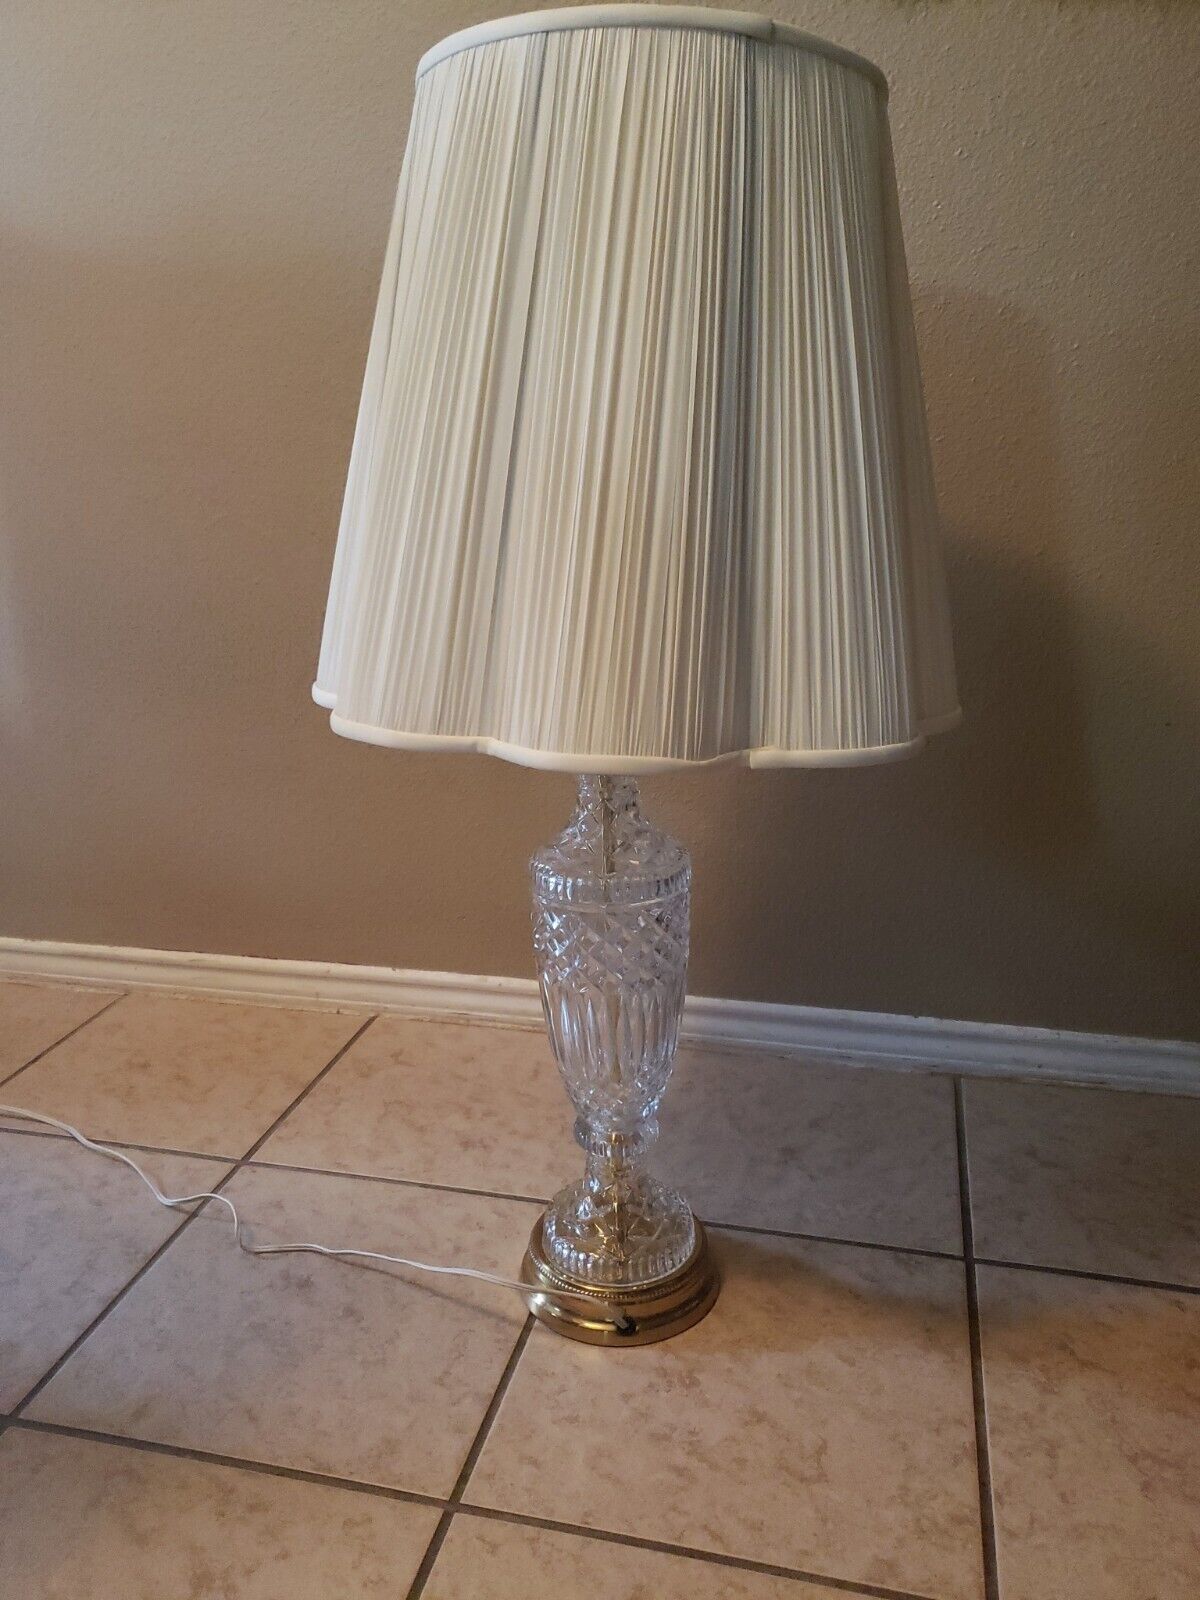 Outstanding Cut Glass 33” Hollywood regency table Lamp Midcentury Diamond Patter